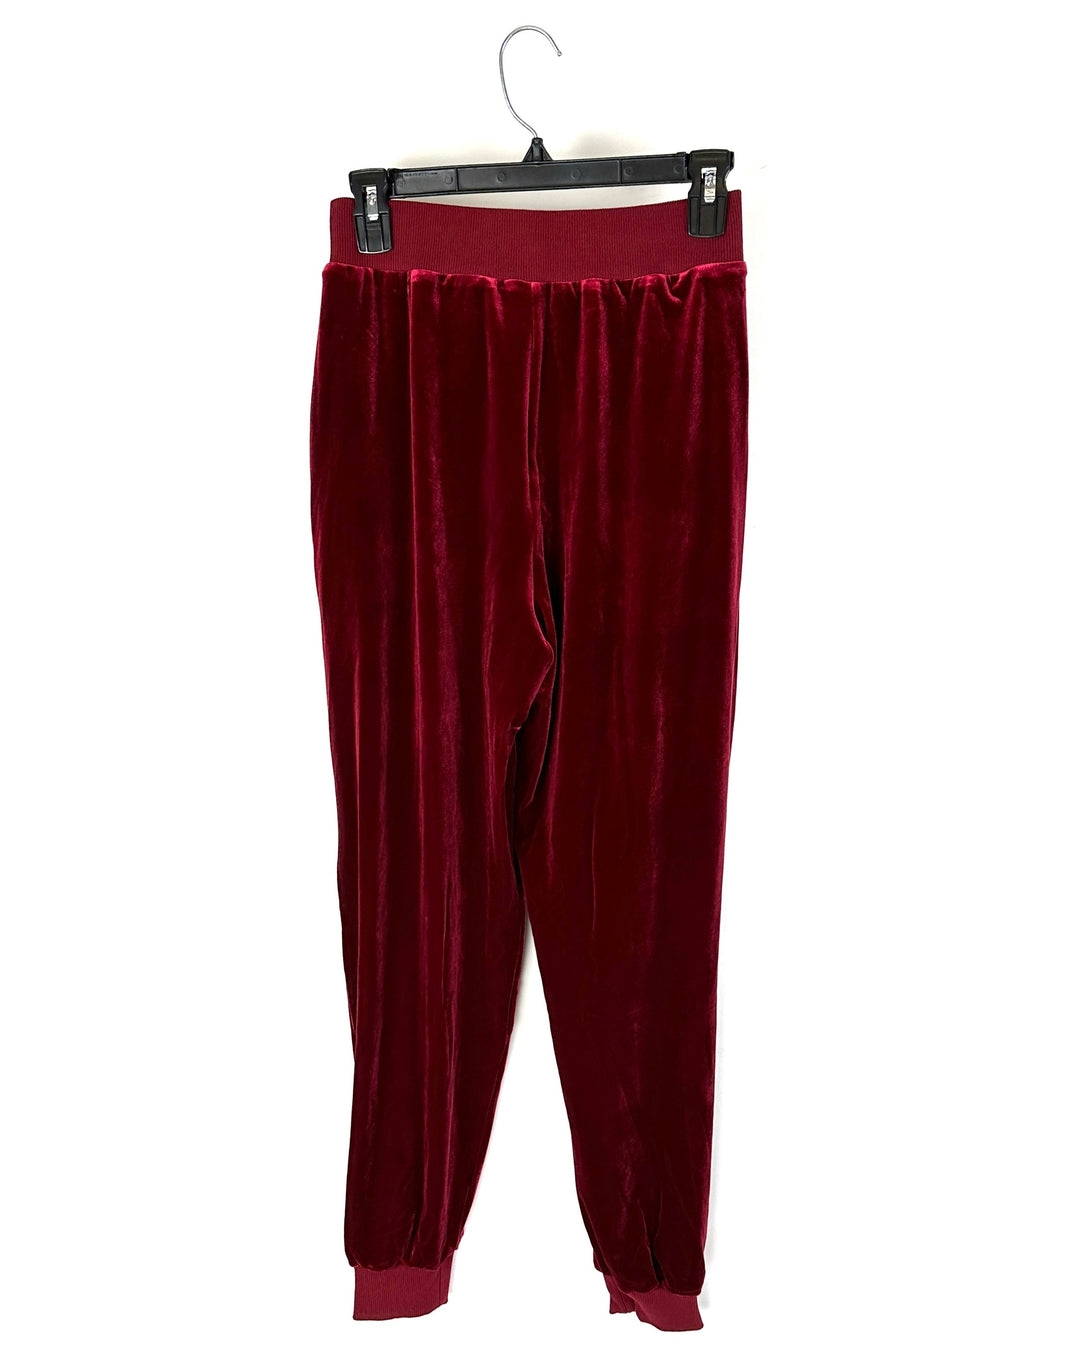 Red Joggers - Small, Medium, Large